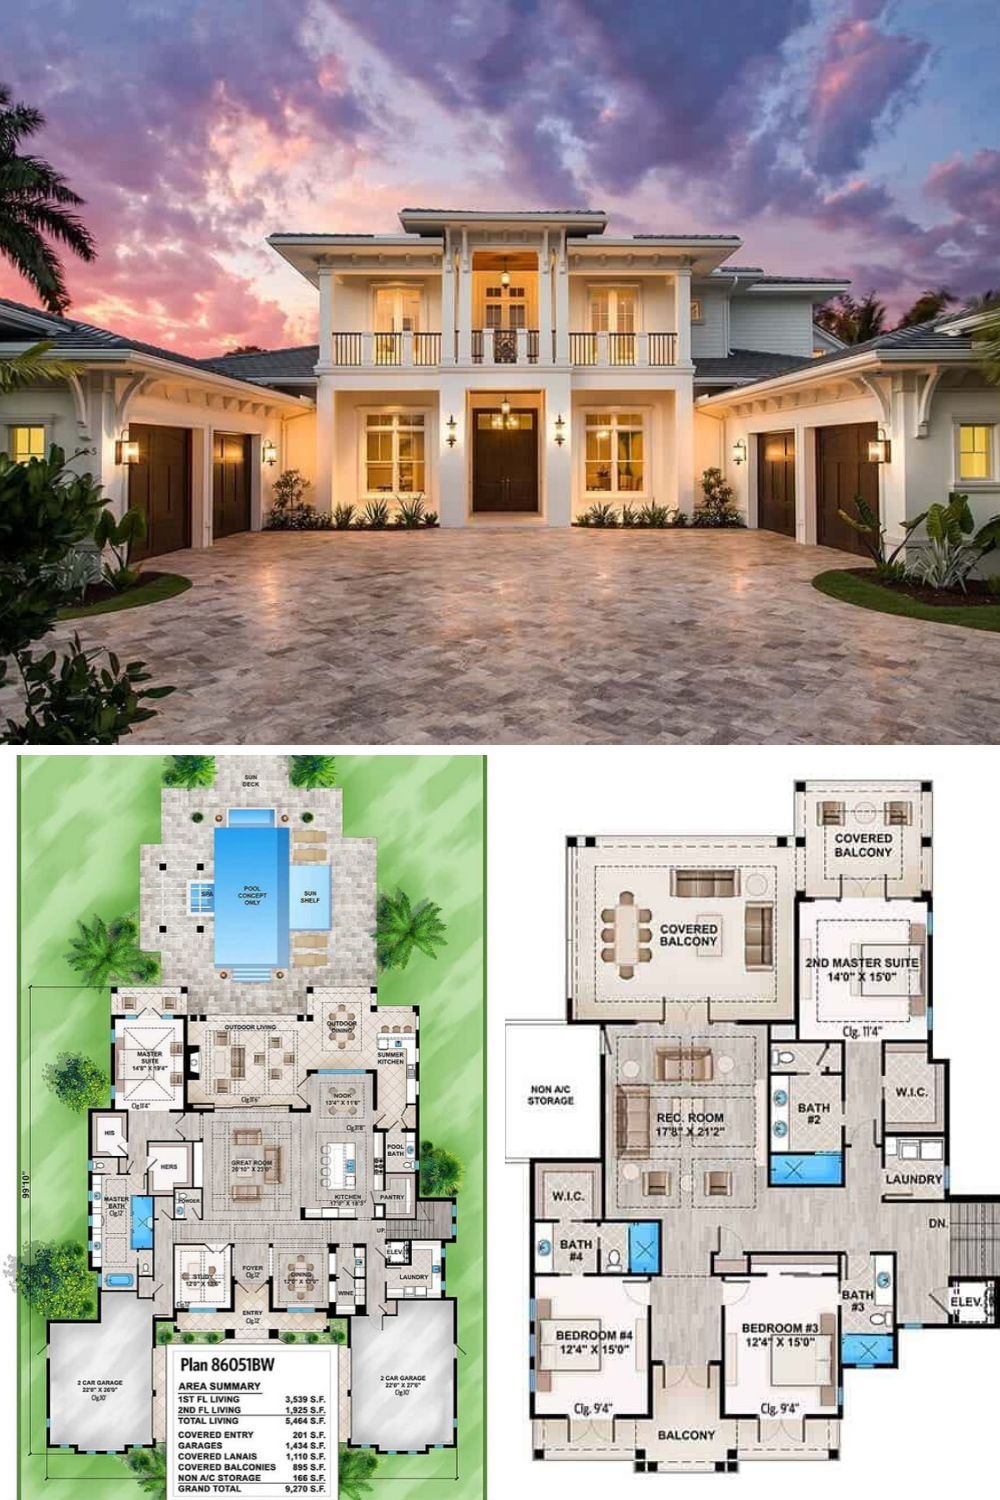 4Bedroom TropicalStyle TwoStory Home in 2020 Florida